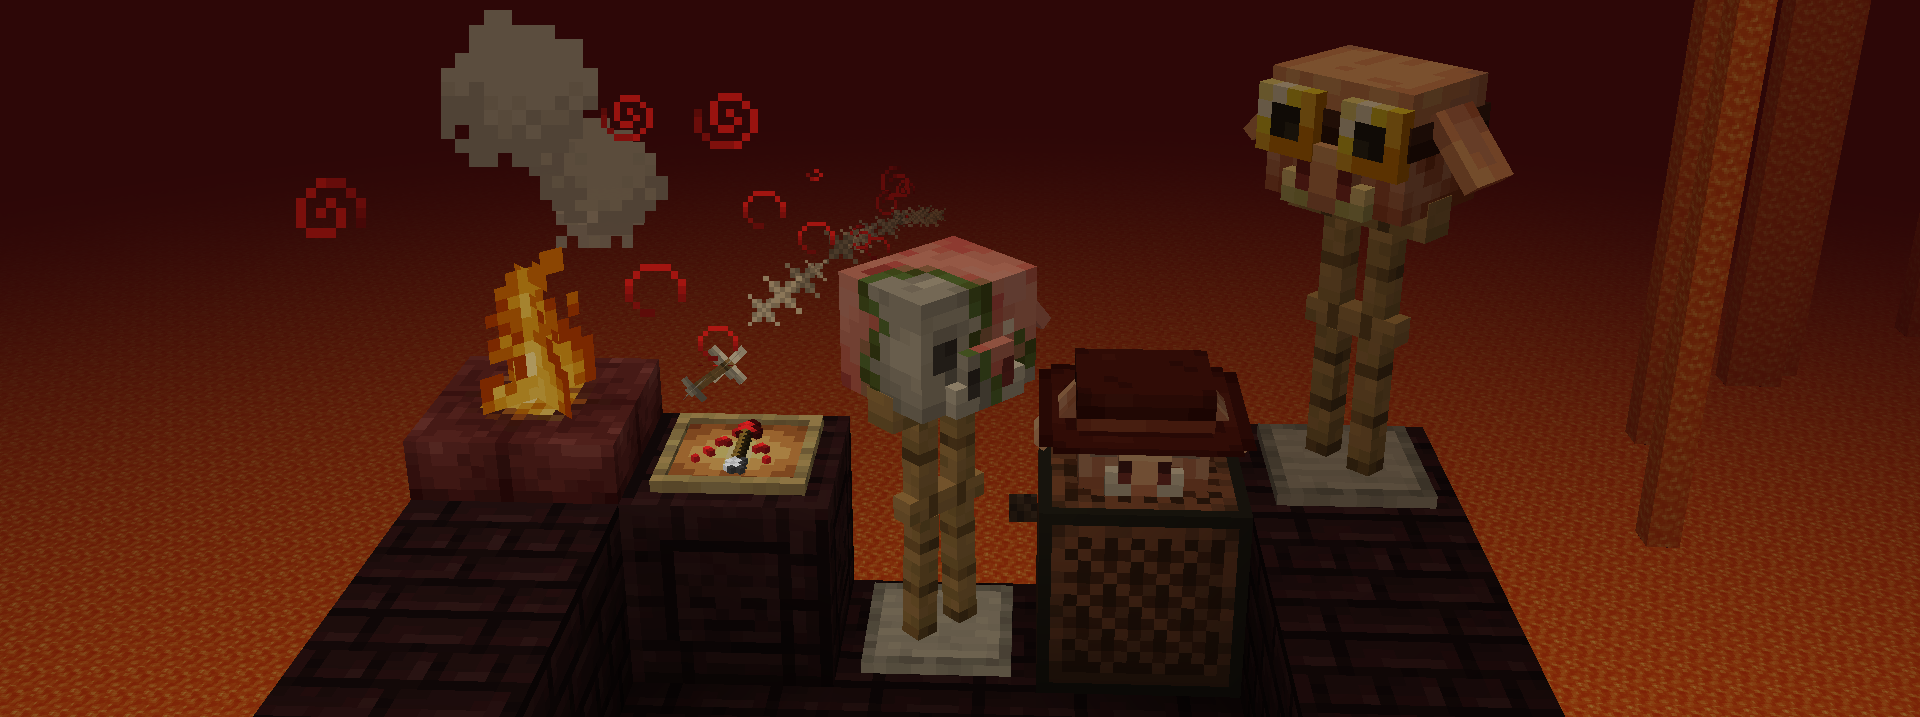 A display of Piglin Proliferation's miscellaneous features - a Fire Ring, a Healing arrow (representing the changes to it), and some of the new Piglin Head variants on armour stands and a note block.